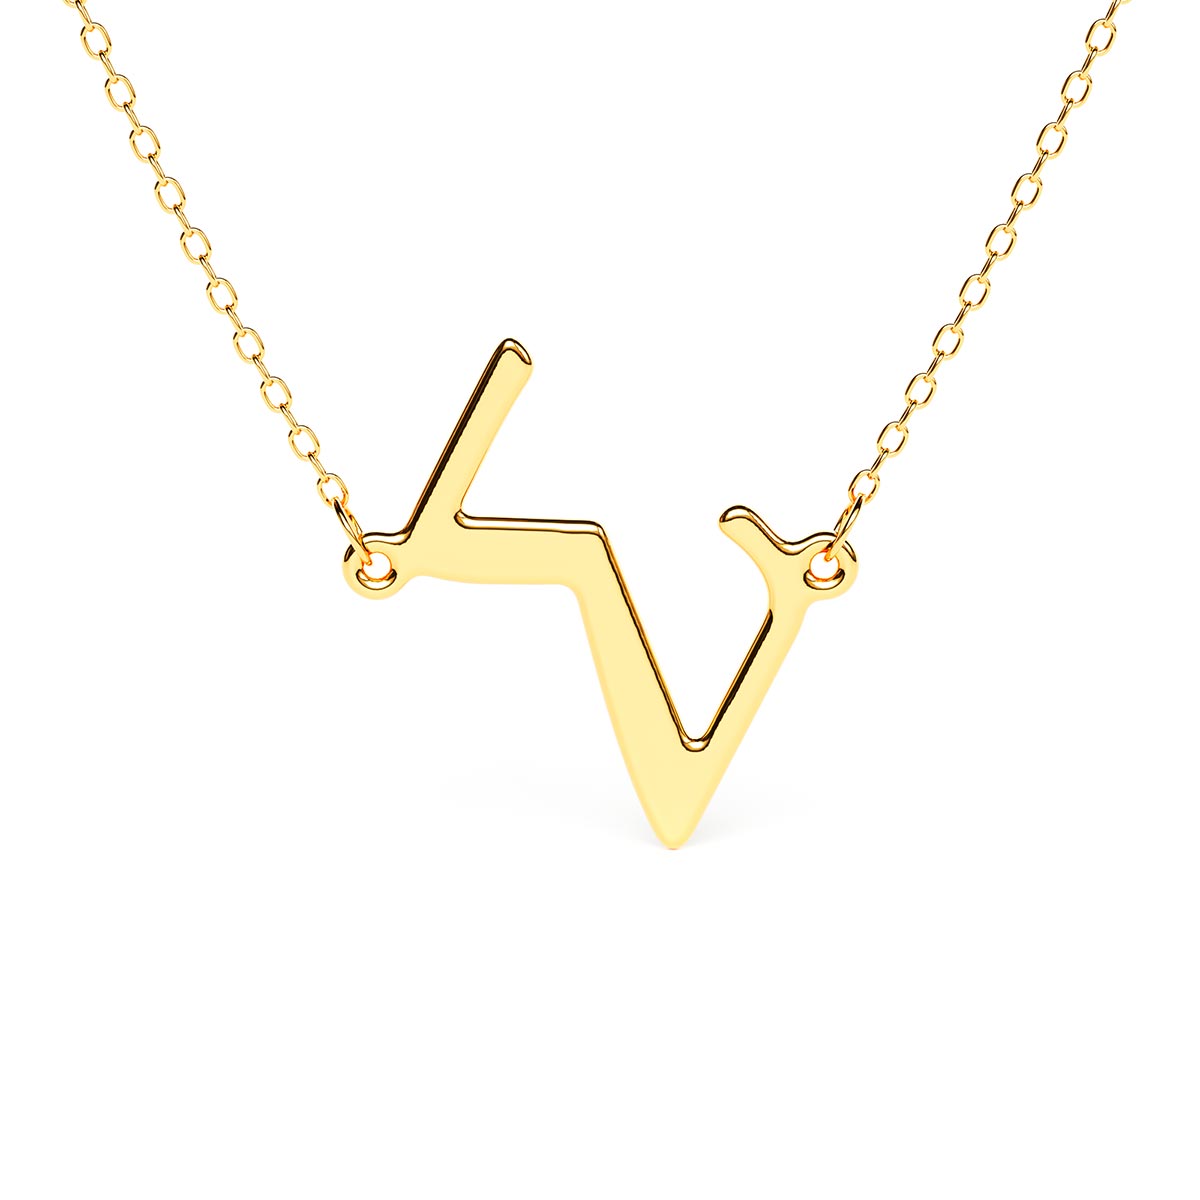 LOUIS VUITTON LV Volt Upside Down Earrings, Yellow Gold, White Gold And Diamonds Gold. Size Nsa